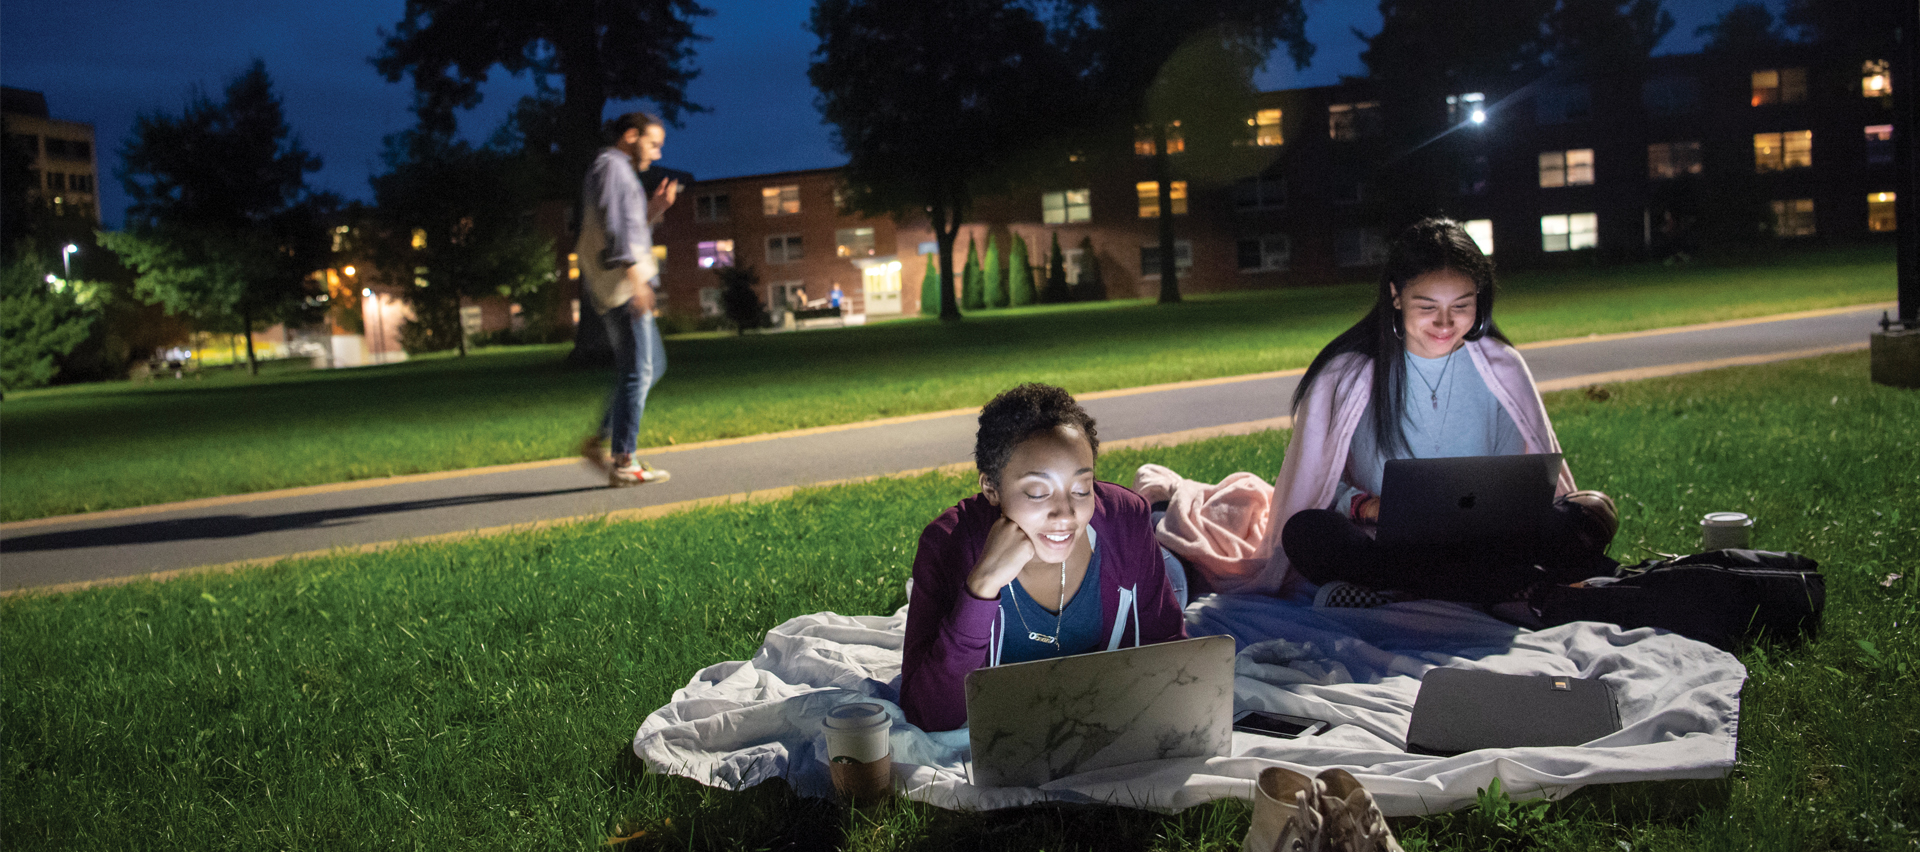 students sitting on the grass under a night sky